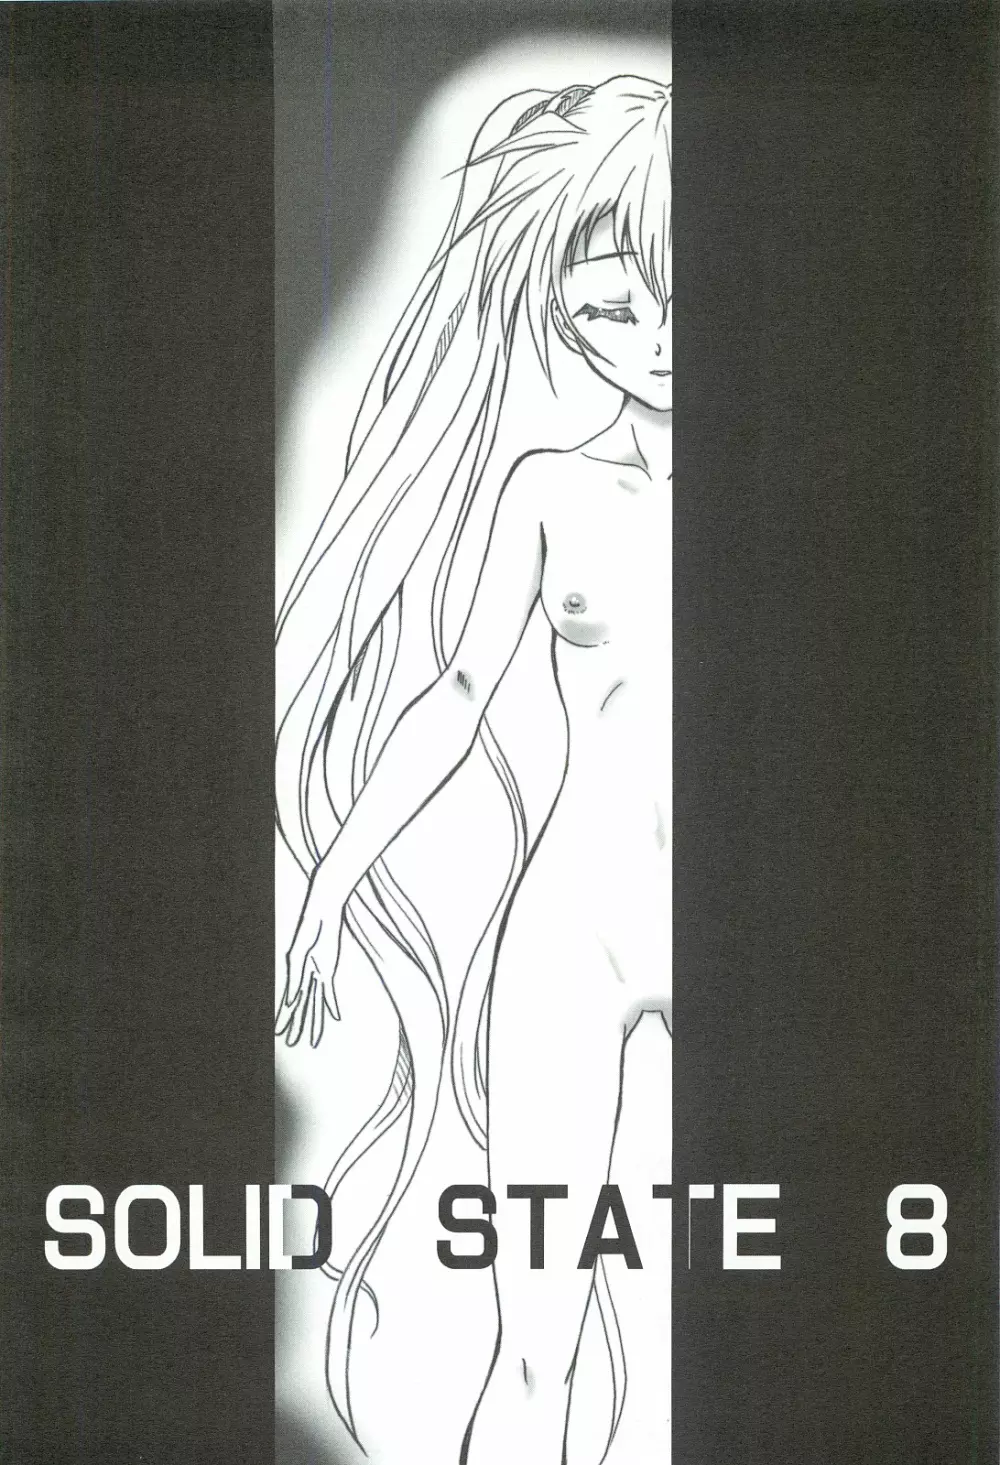 SOLID STATE 8 7ページ